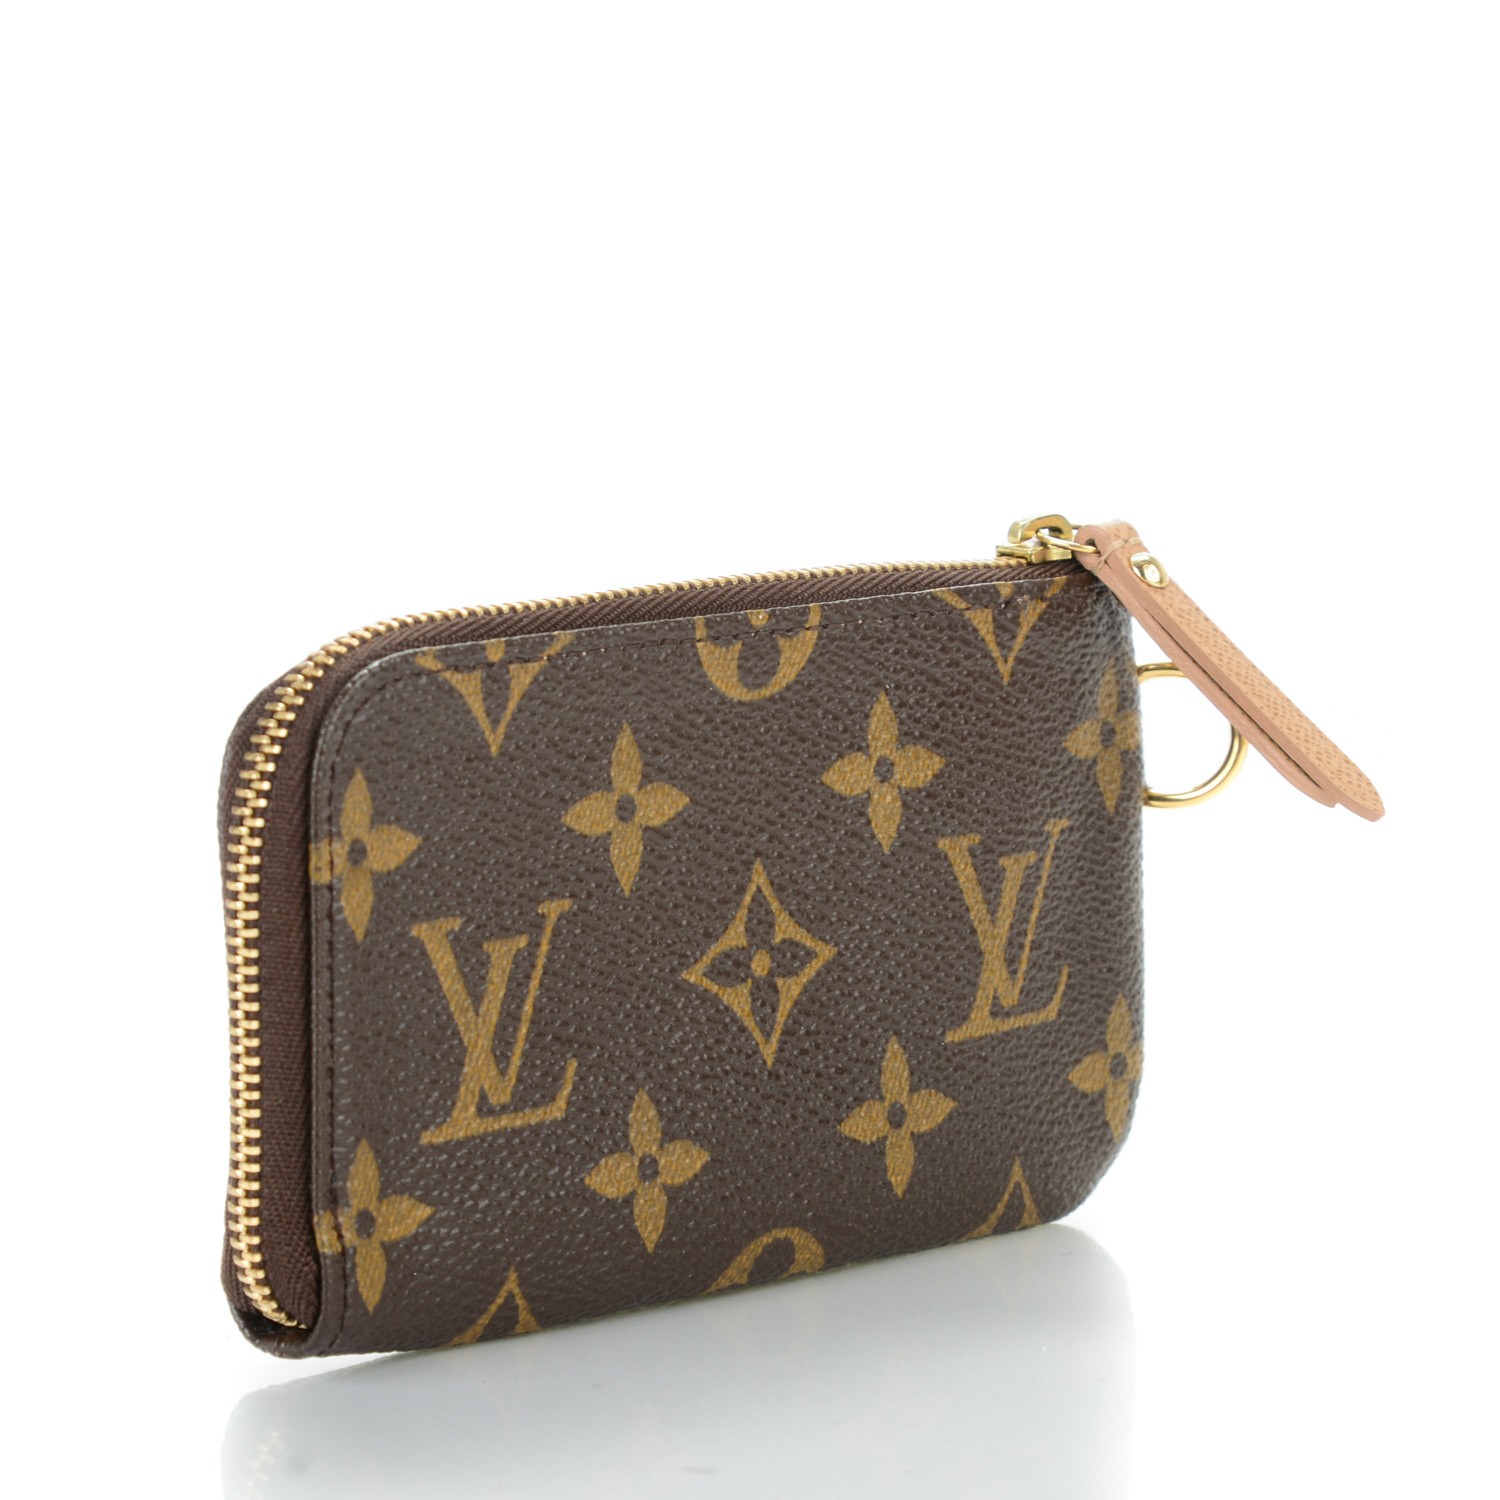 LOUIS VUITTON Monogram Complice Trunks and Bags Key Pouch 151556